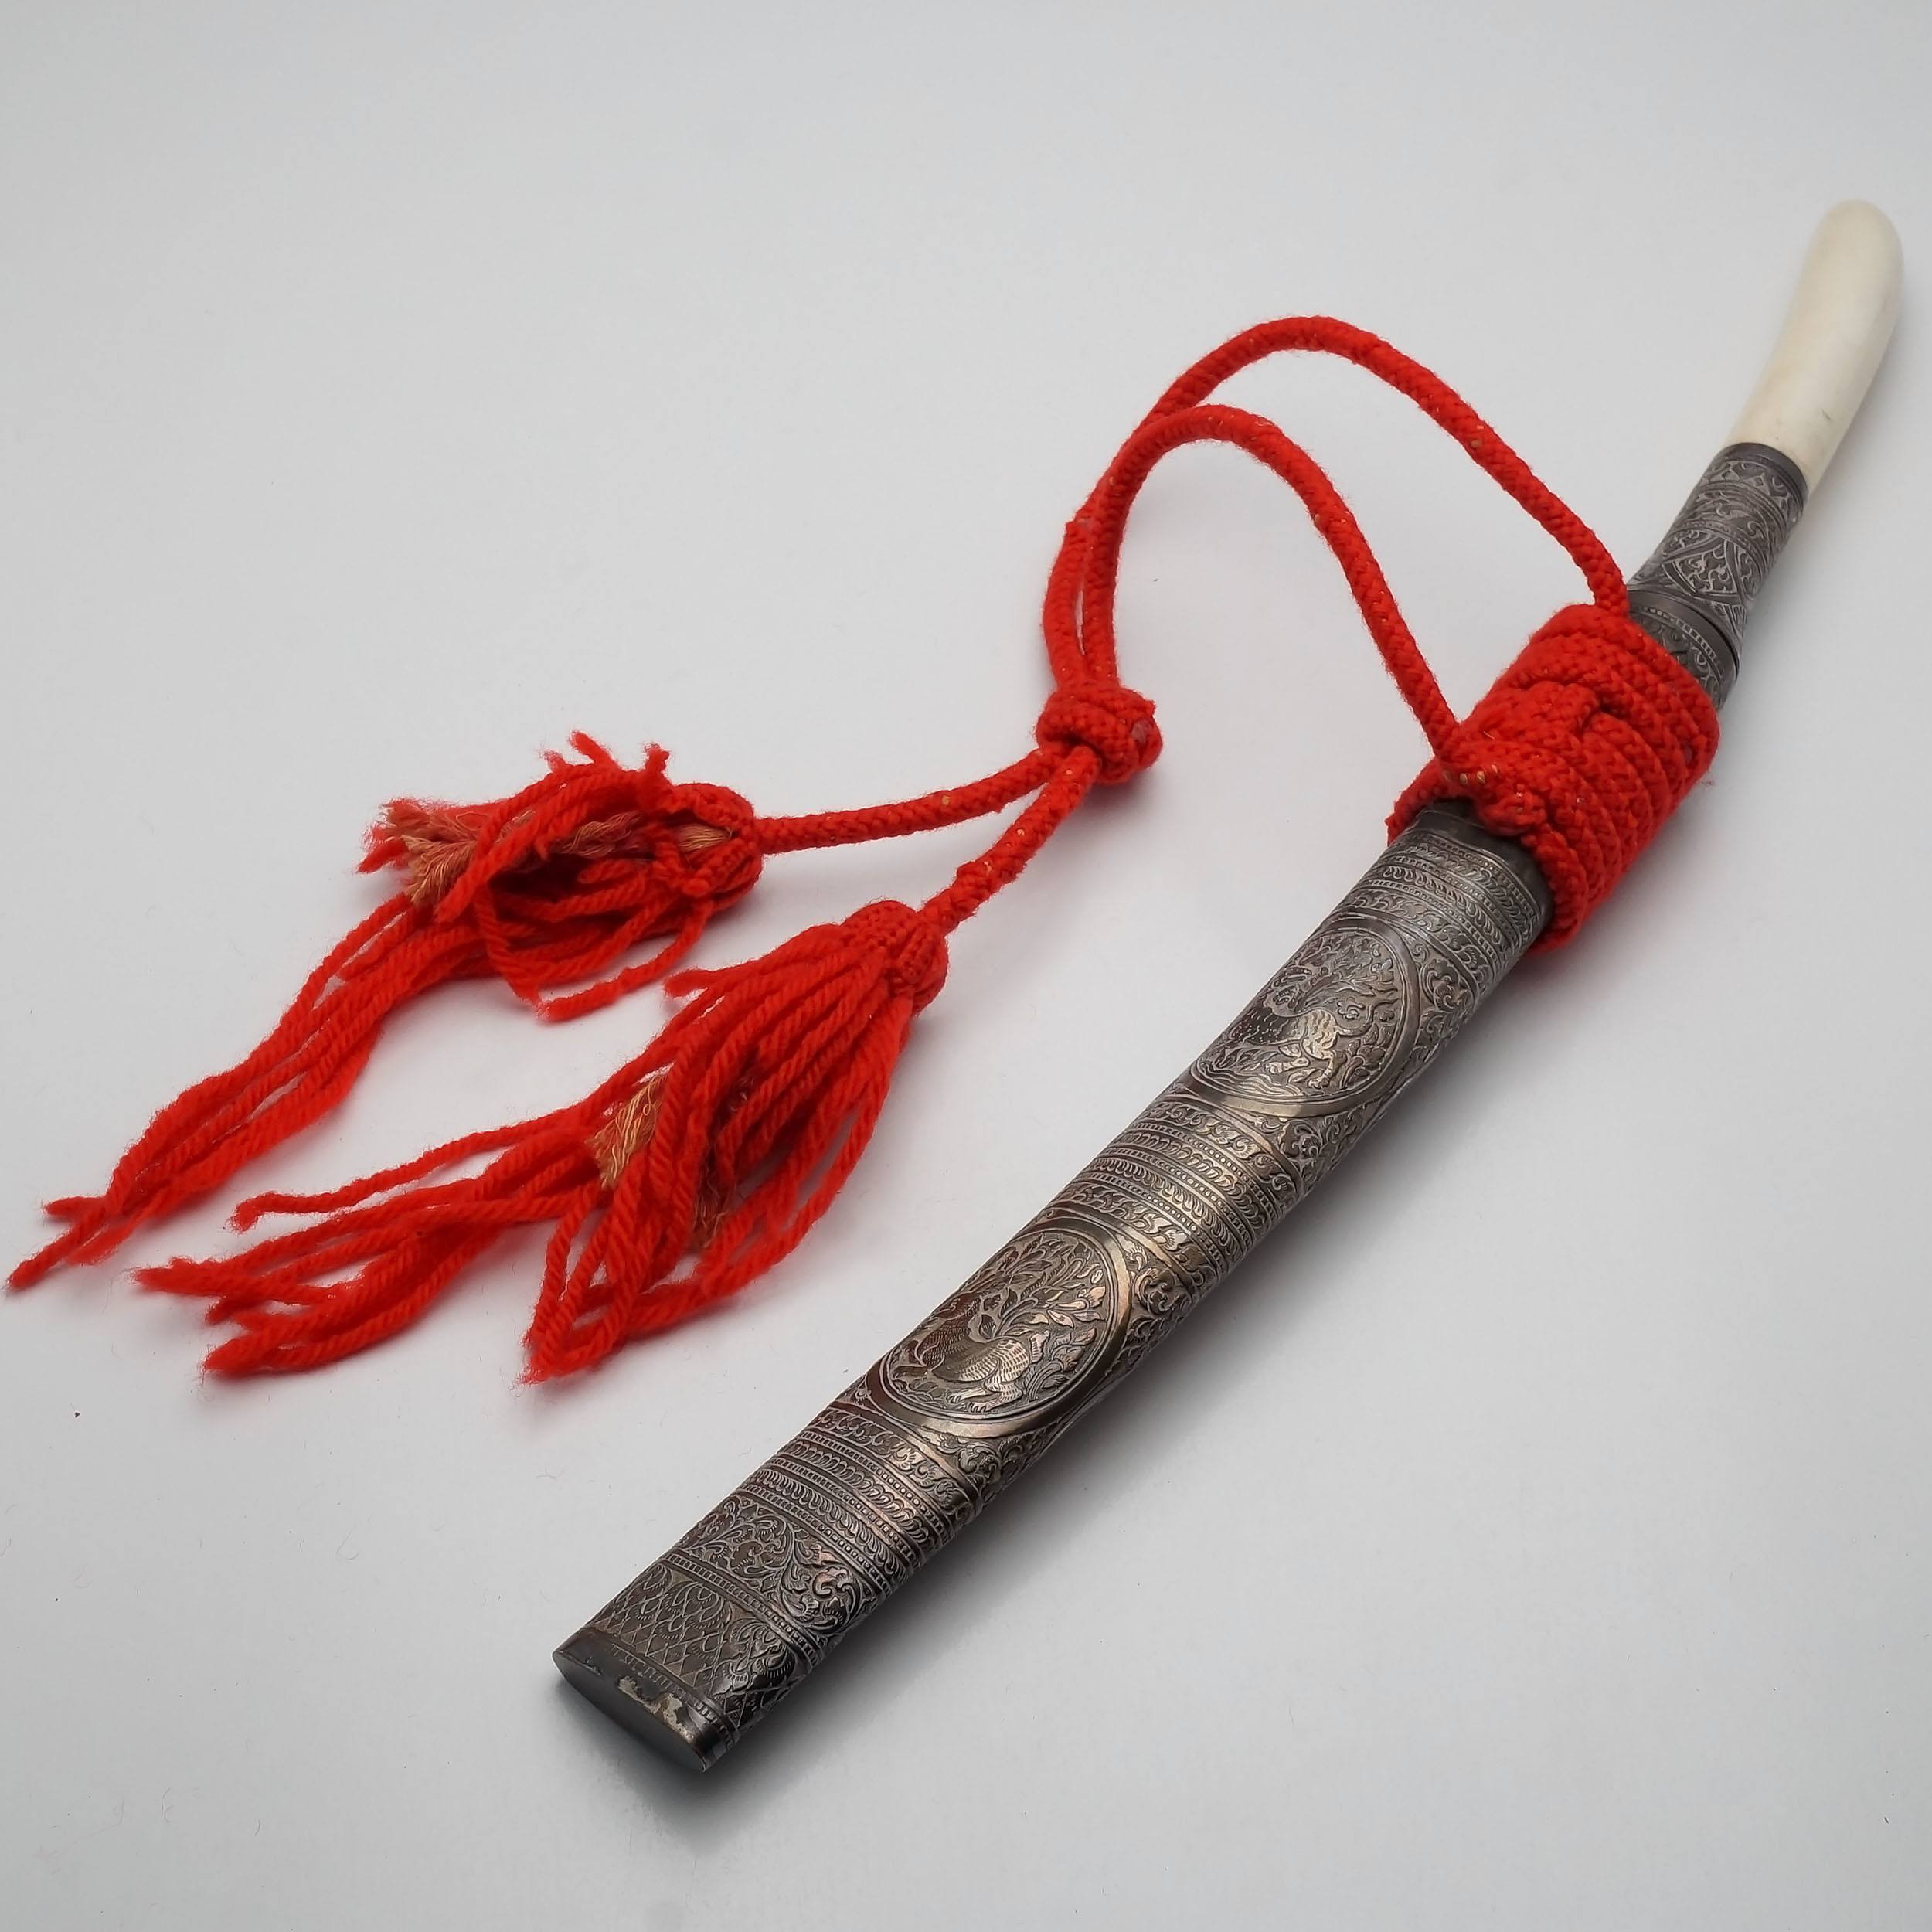 'Lao Ivory Handled Ceremonial Sword With Engraved Silver Sheath and Red Woven Tassels'